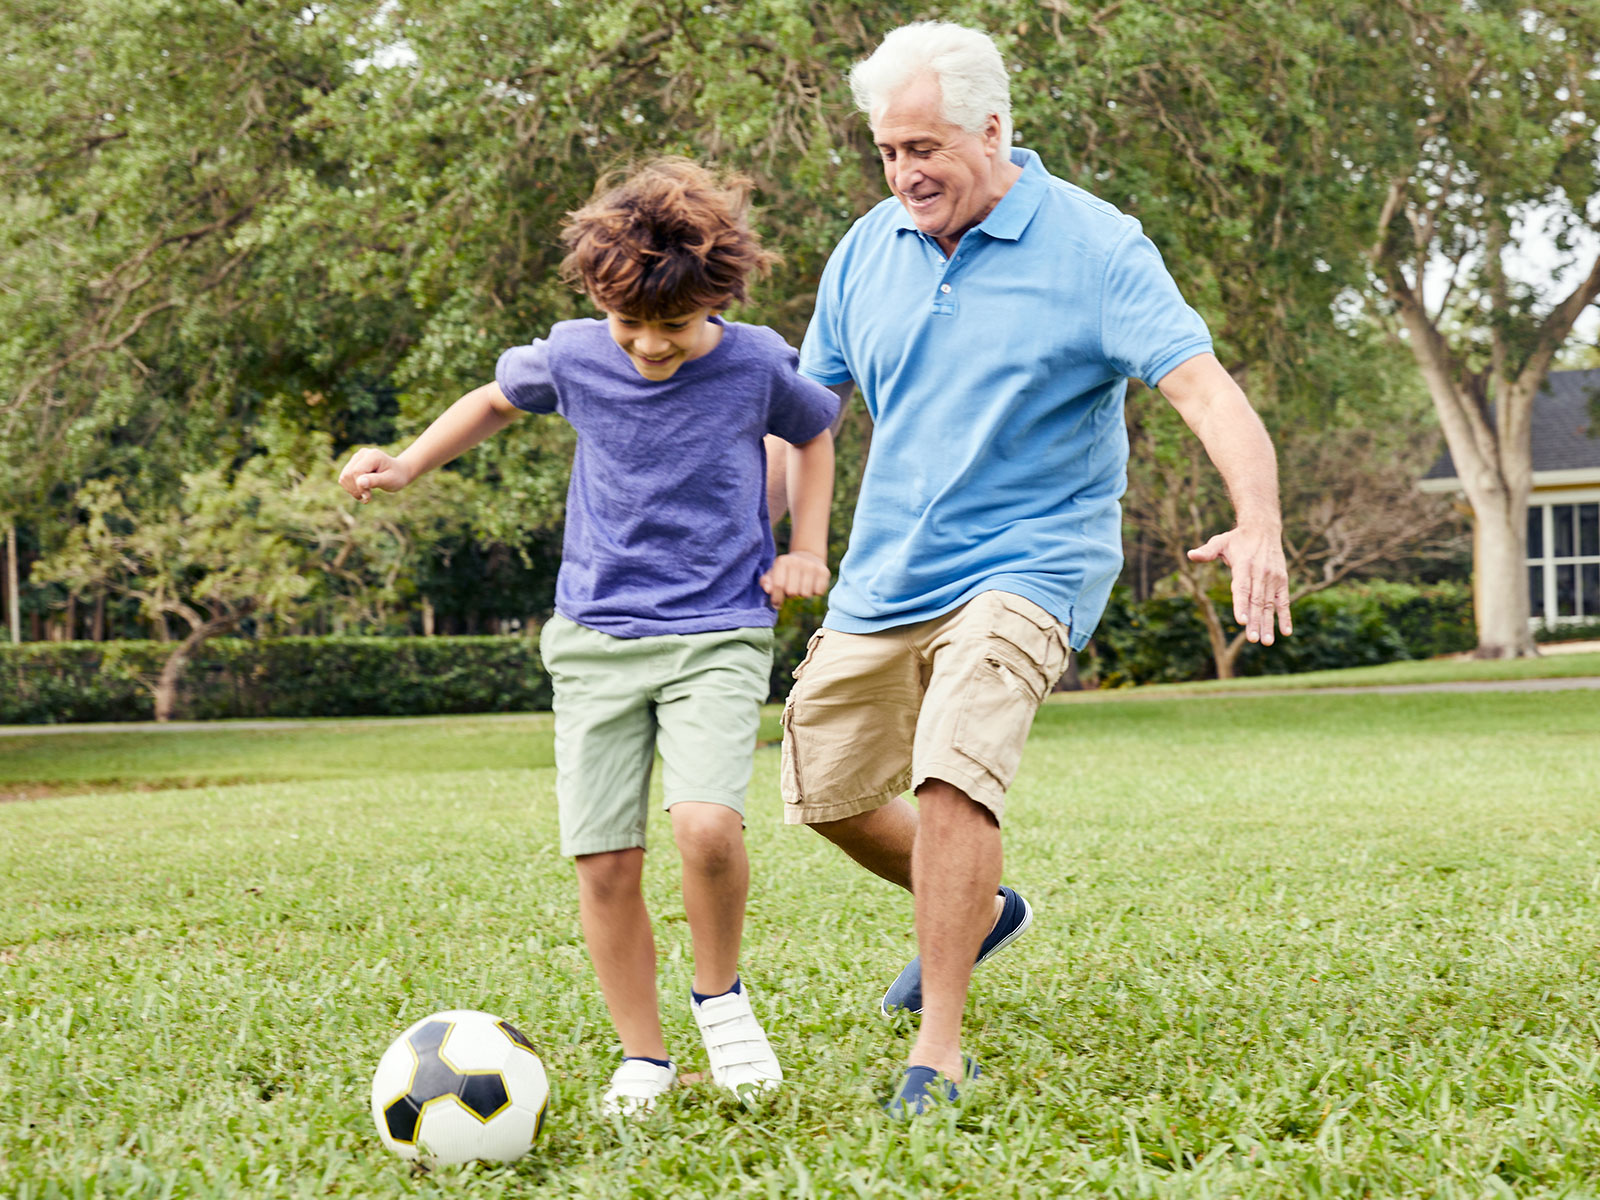 Grandfather playing soccer with grandson.